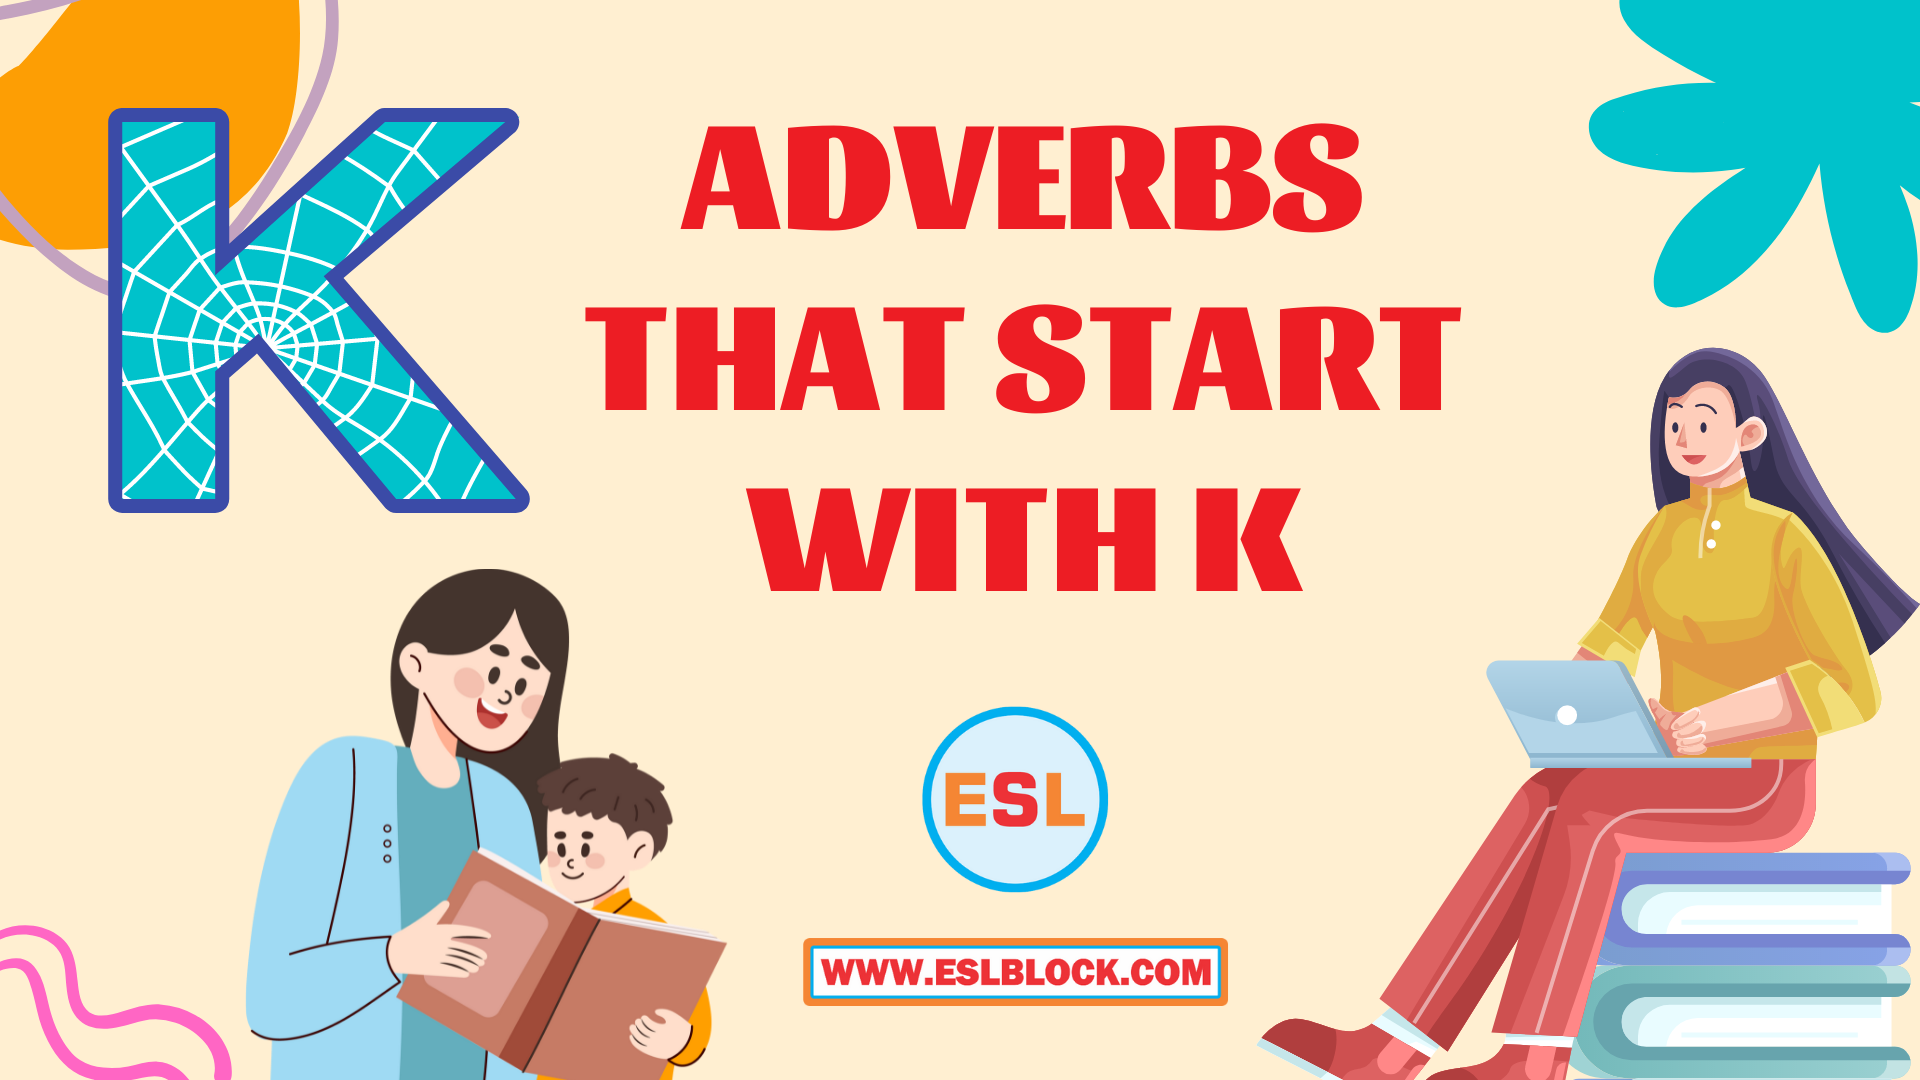 100 Example Sentences Using Adverbs, 4 Letter Adverbs That Start with K, 4 Letter Words, 5 Letter Adverbs That Start with K, 5 Letter Words, 6 Letter Adverbs That Start with K, 6 Letter Words, A to Z Adverbs, AA Adverbs, Adverb vocabulary words, Adverbs, Adverbs That Start with K, Adverbs with Example Sentences, All Adverbs, Types of Adverbs, Types of Adverbs with Example Sentences, Vocabulary, What are Adverbs, What are the types of Adverbs, Words That with K